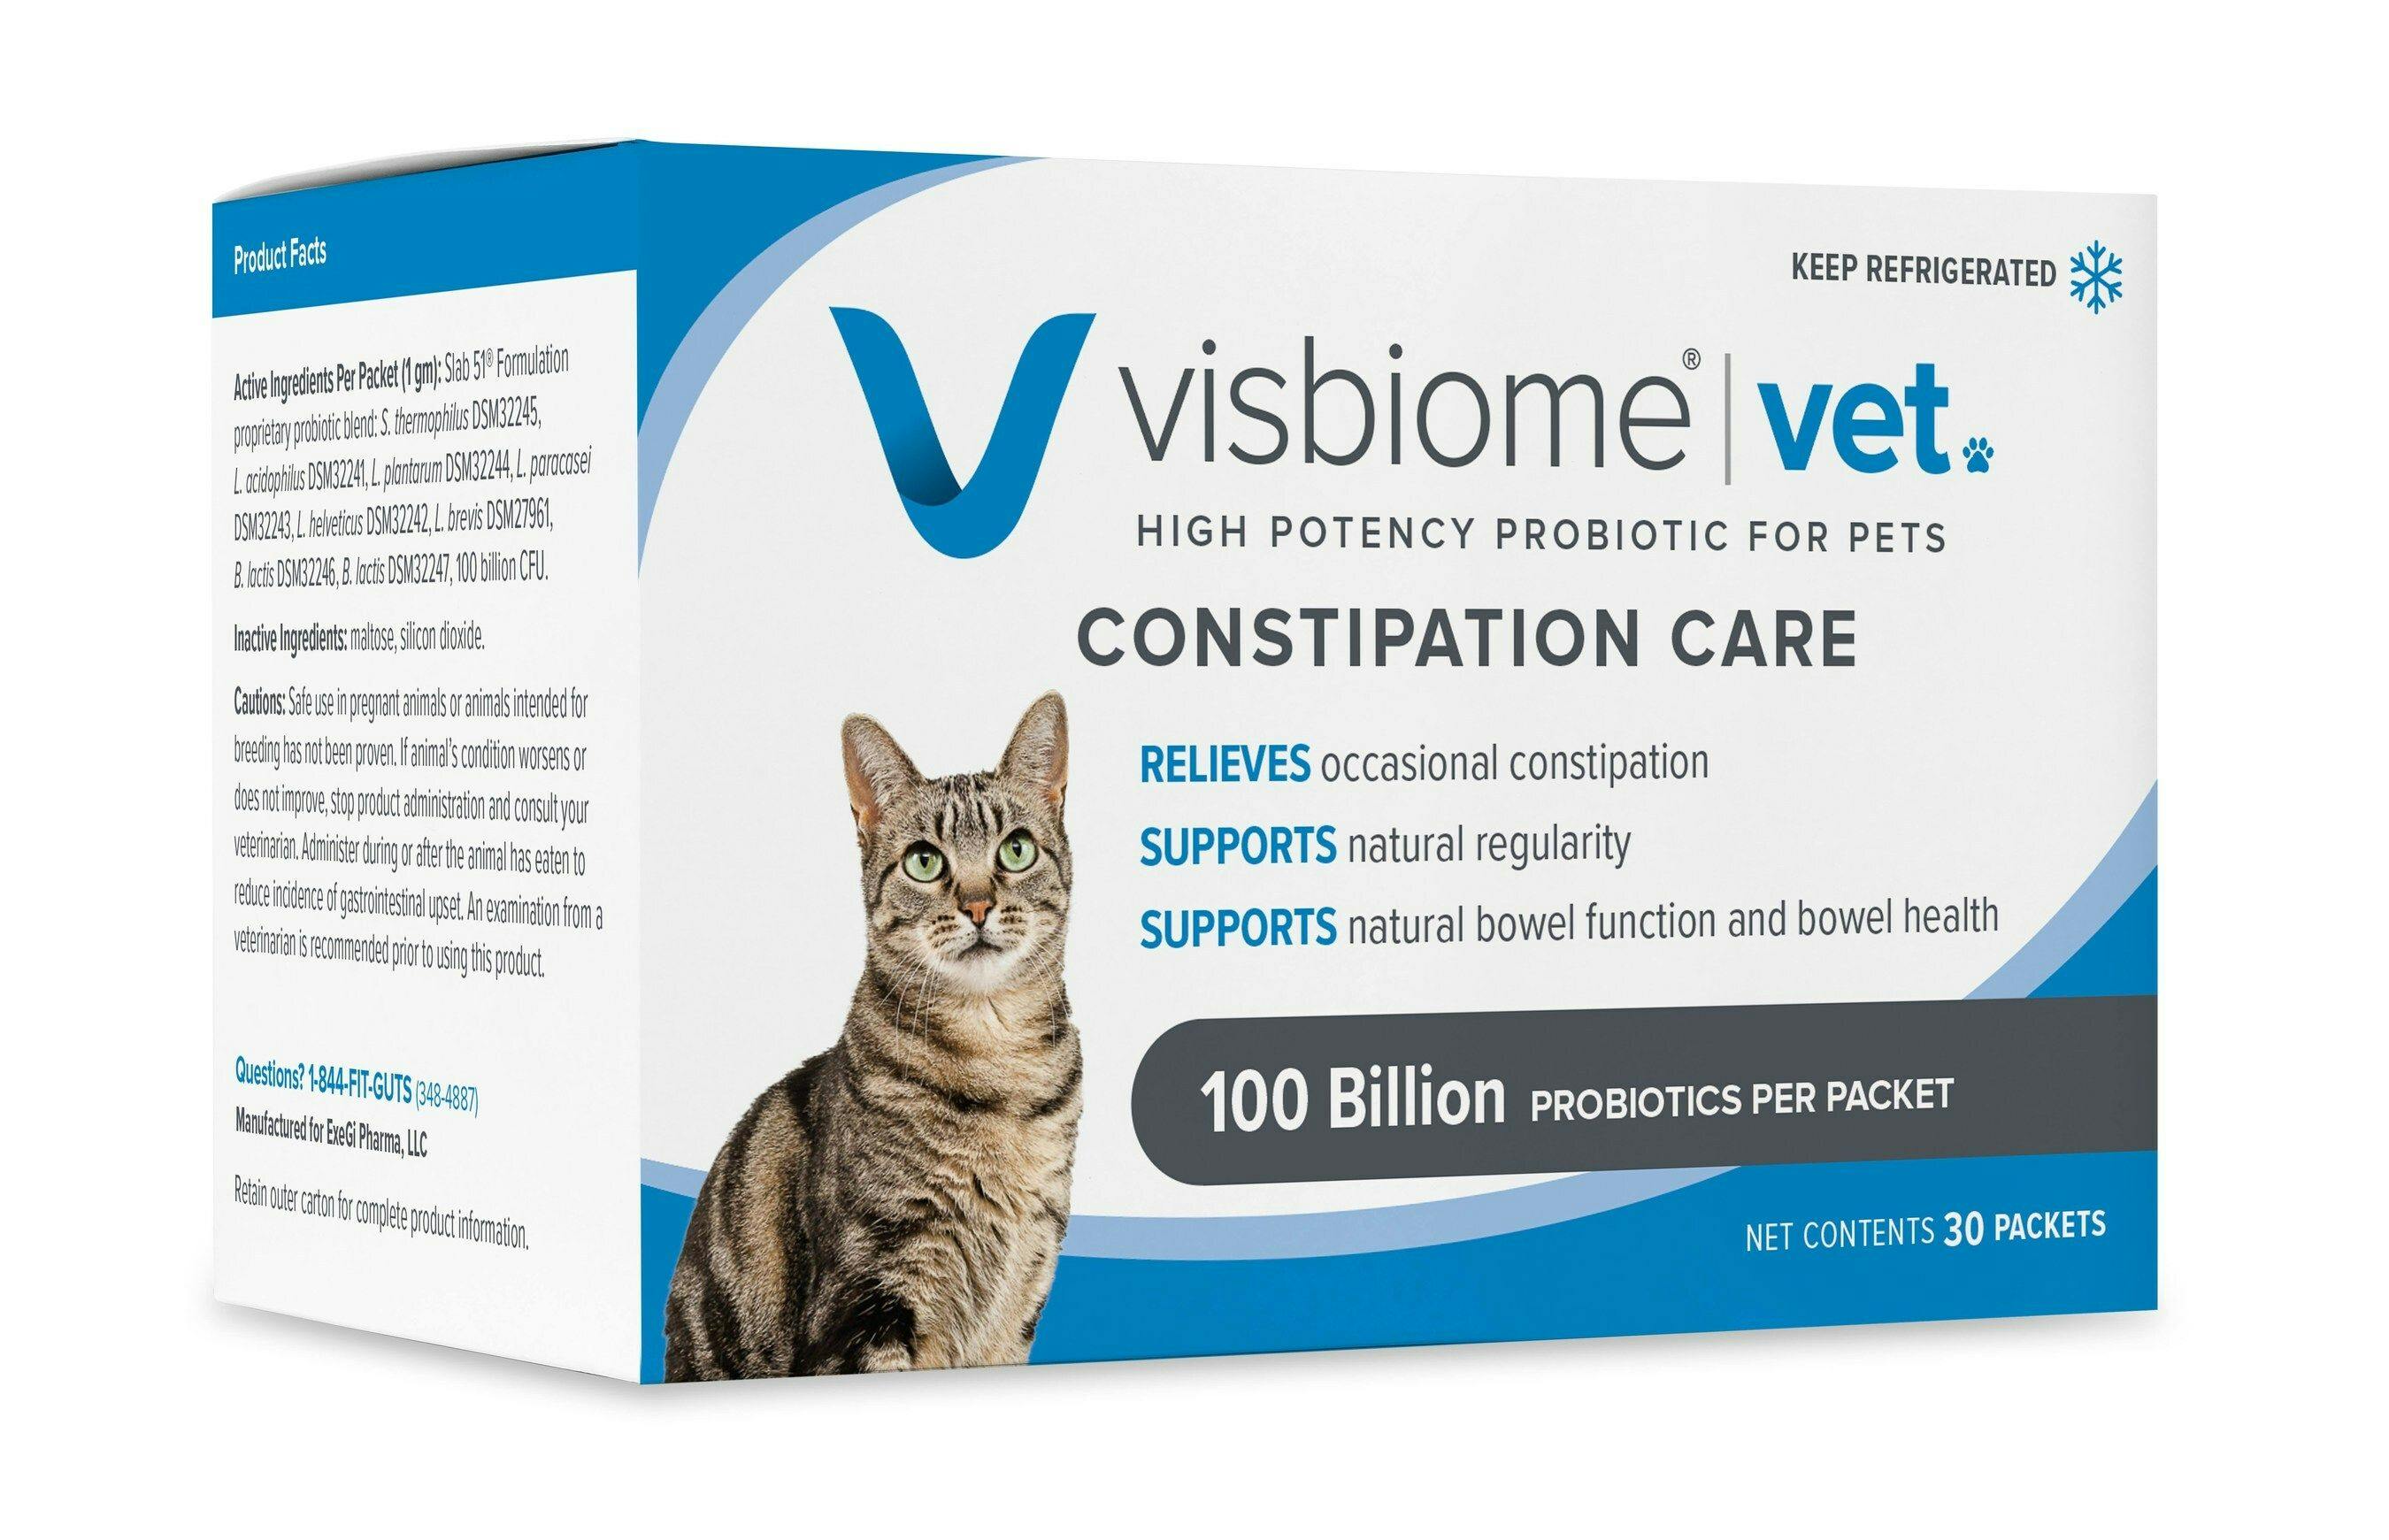 New probiotic product helps occasionally constipated cats 